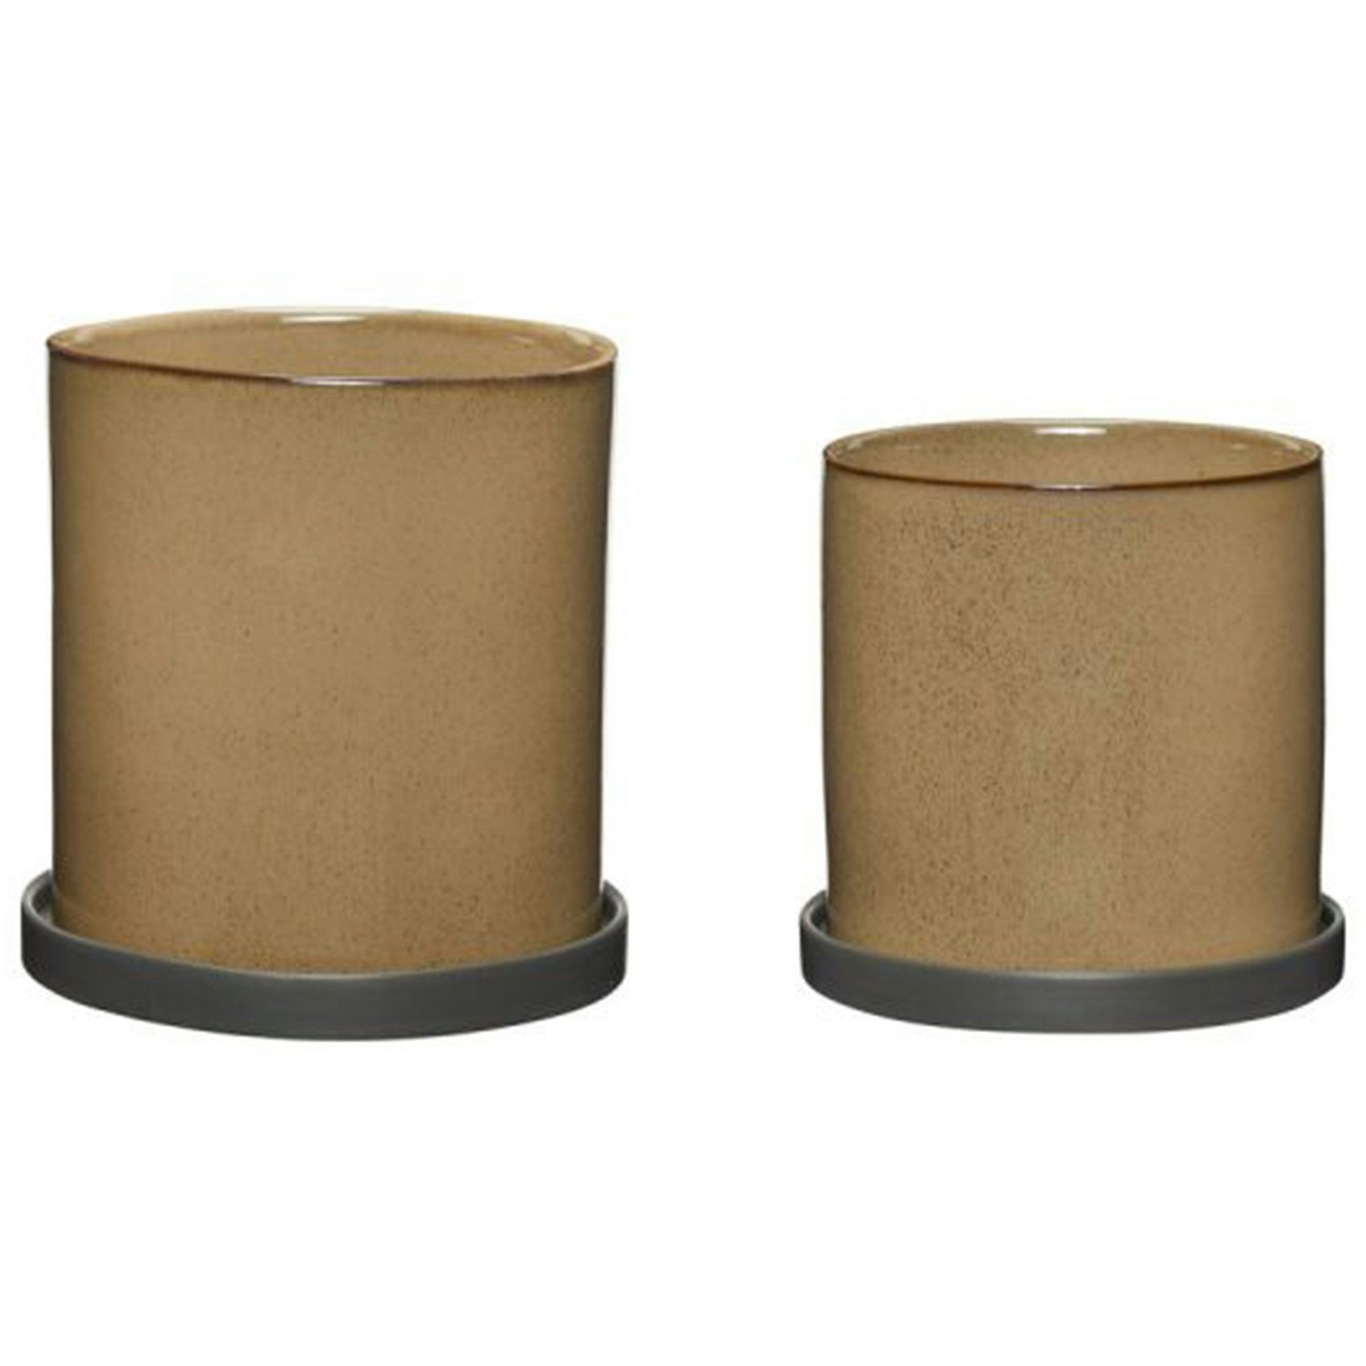 Era Planters With Saucer 2-pack, Sand